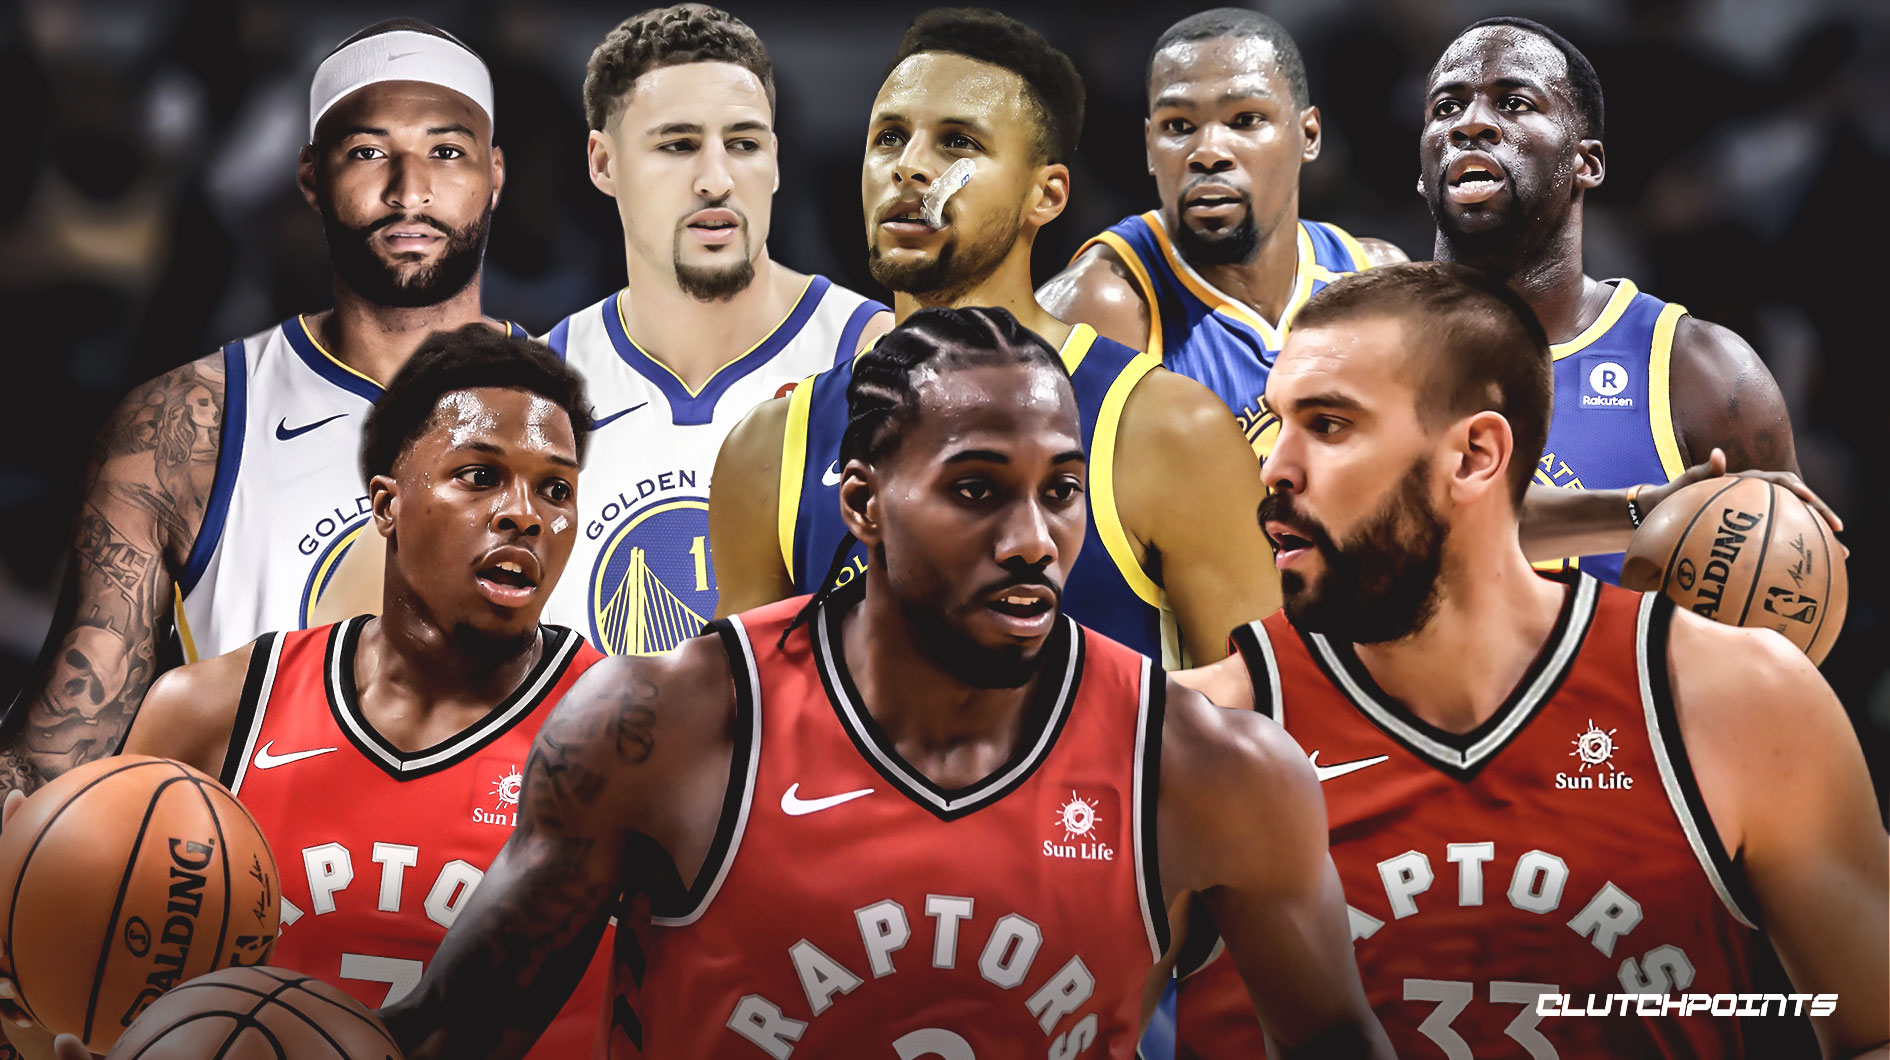 https://clutchpoints.com/wp-content/uploads/2019/03/3-Reasons-the-Raptors-can-dethrone-the-Warriors.jpg